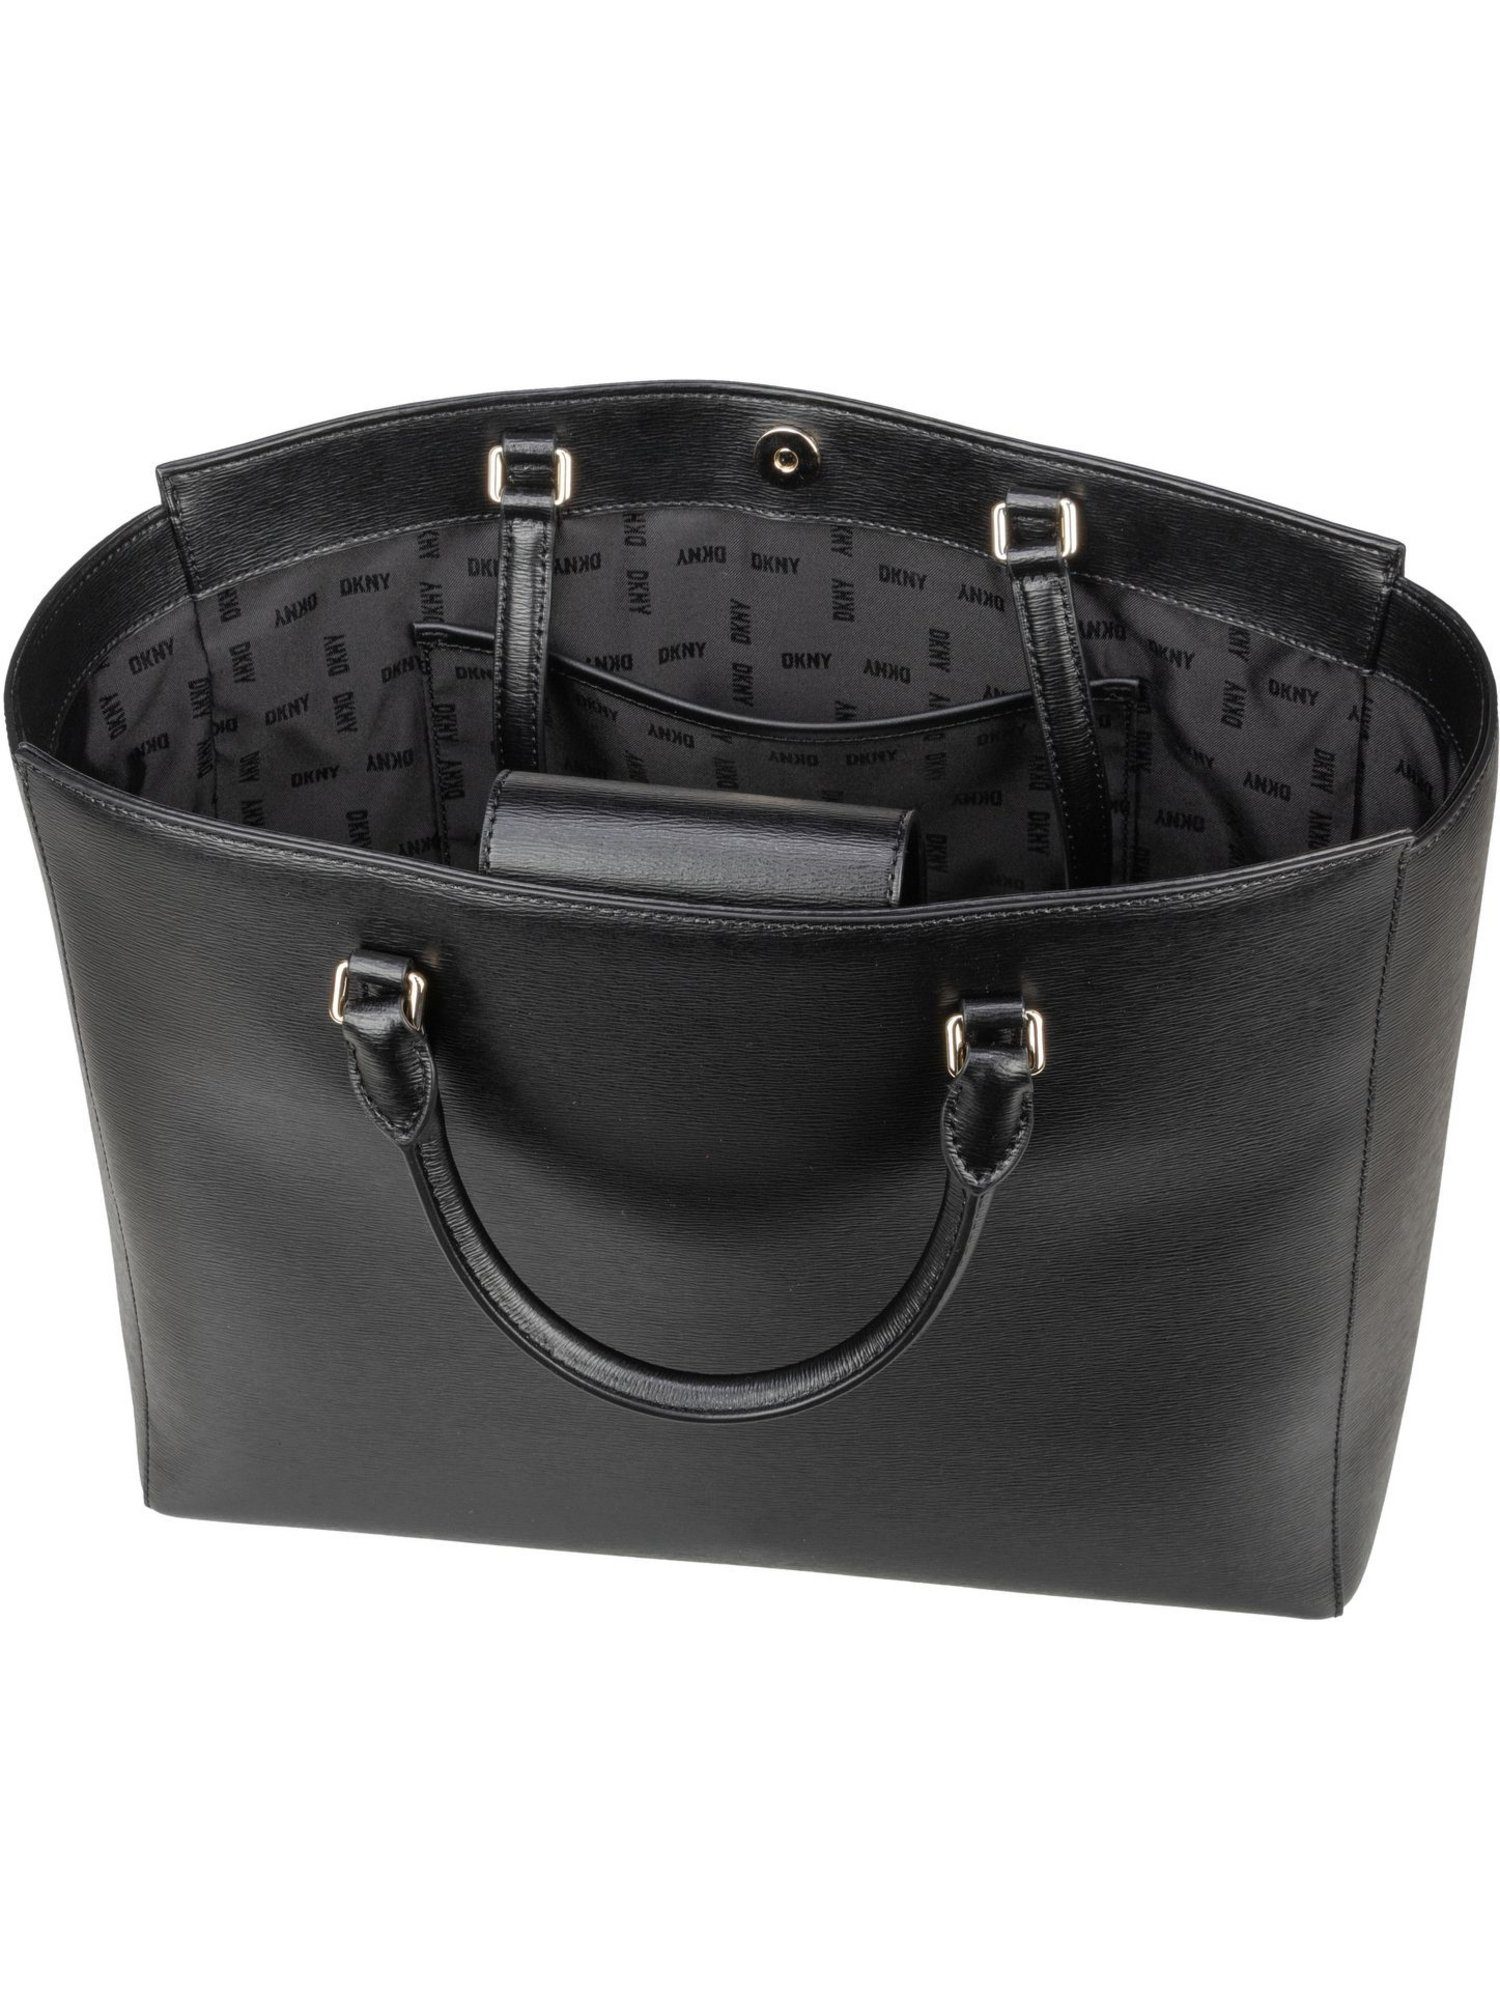 DKNY Book Sutton Paige Tote Shopper Leather